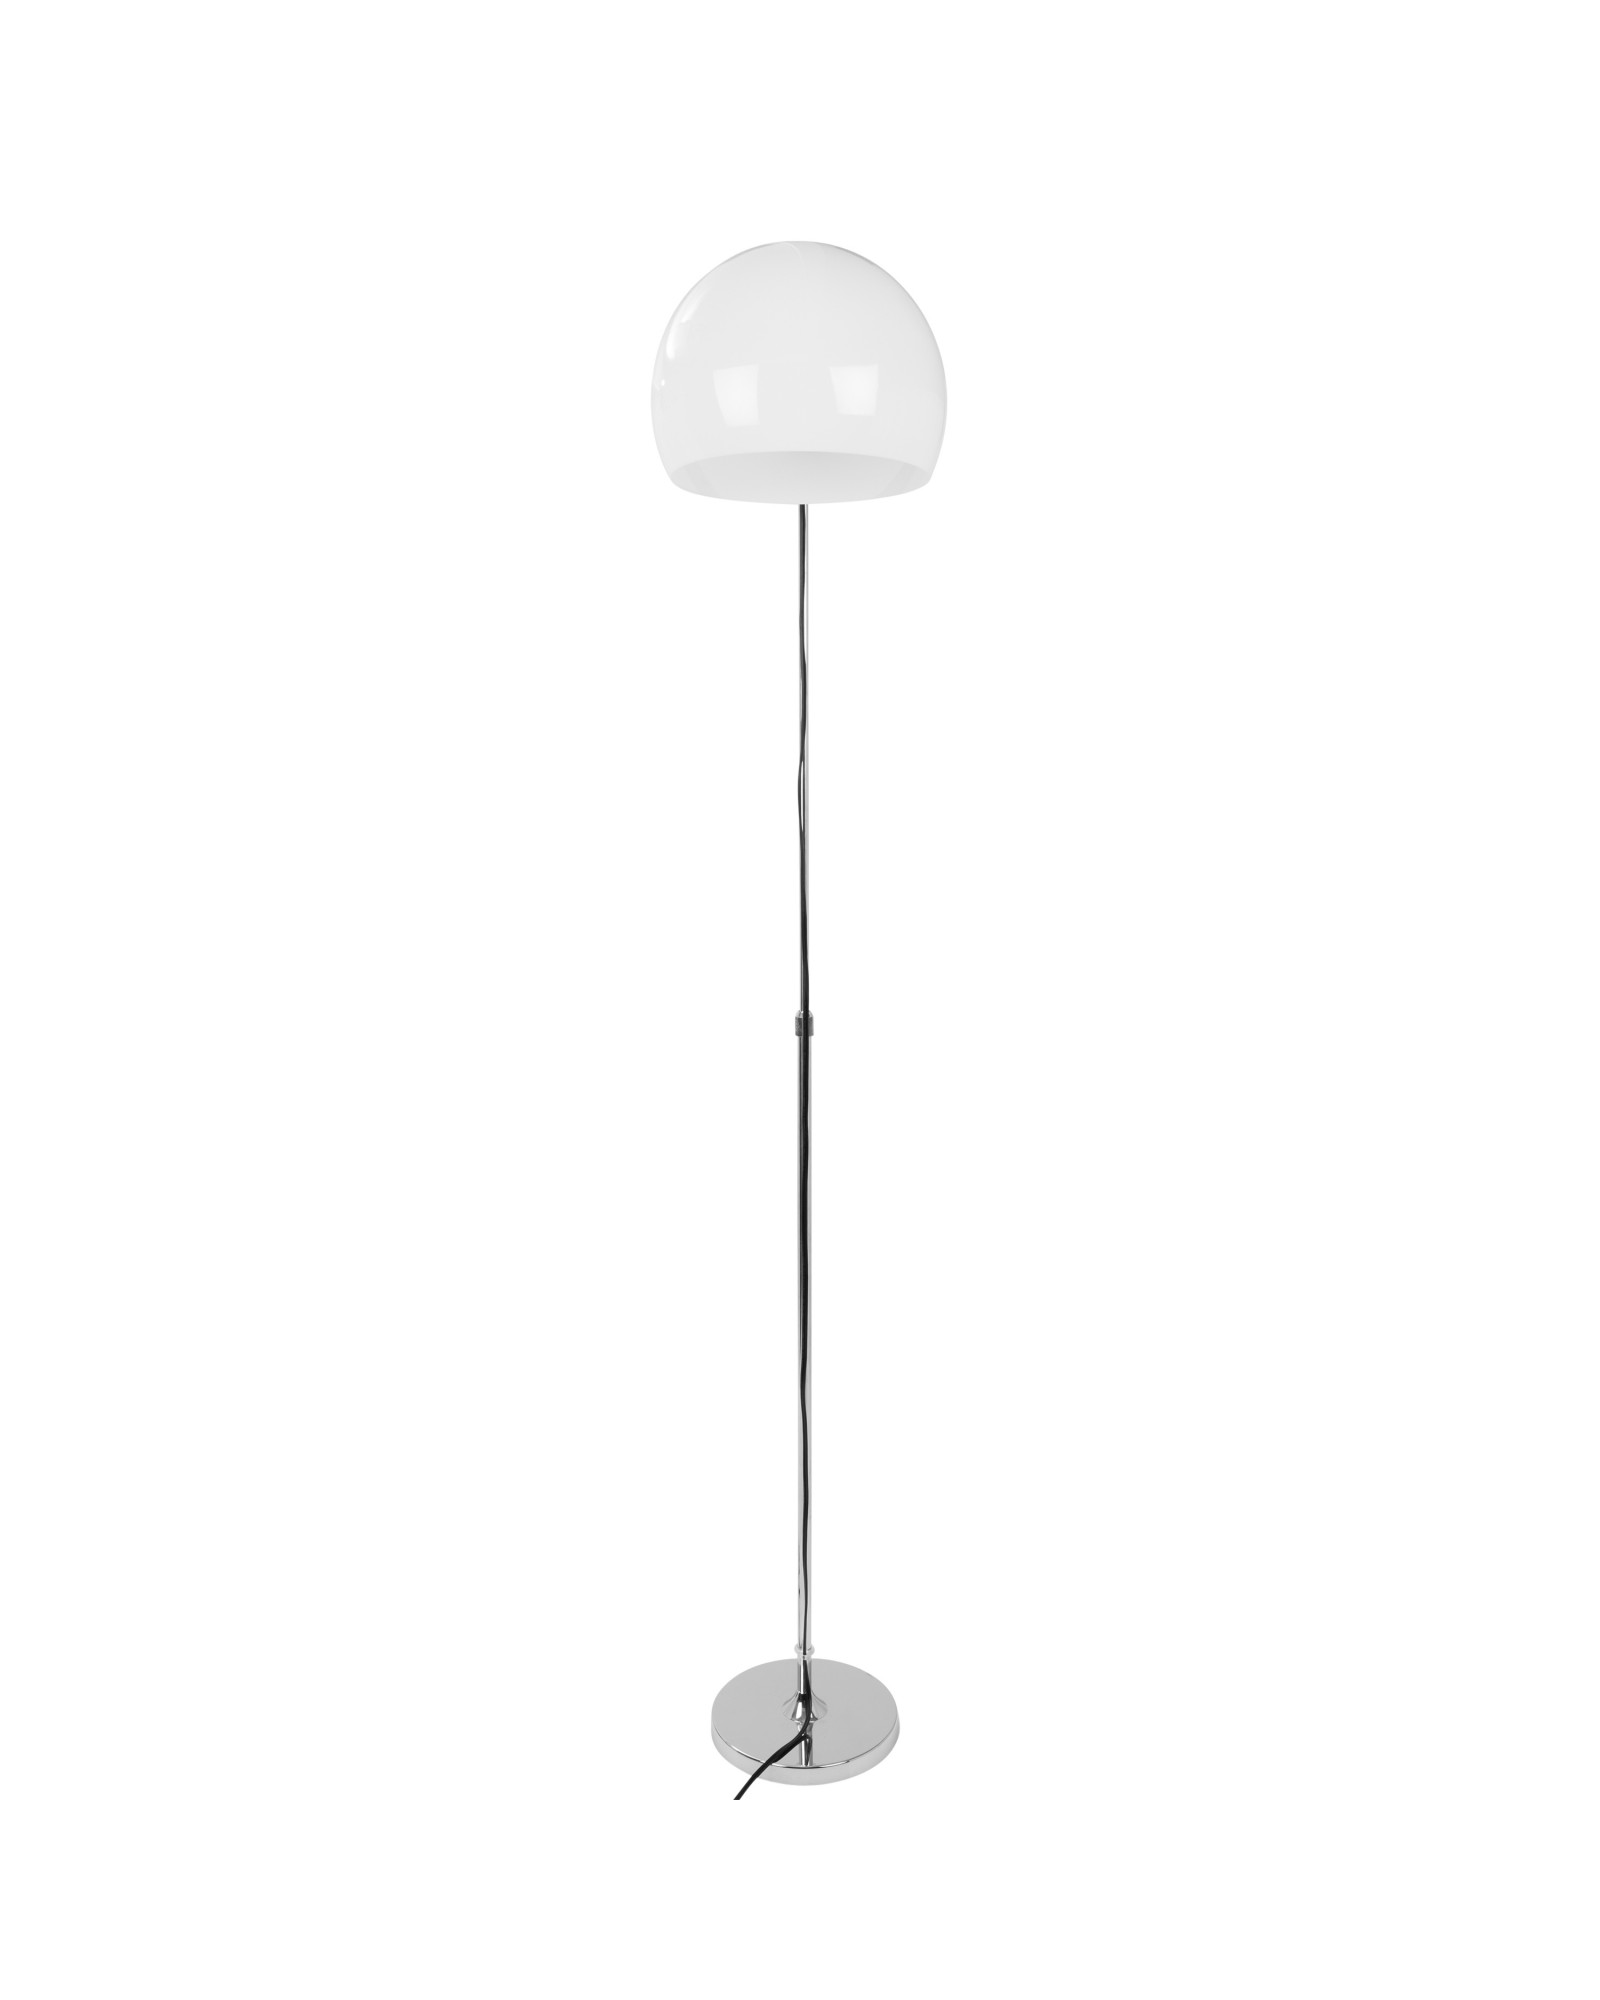 Decco Contemporary Adjustable Floor Lamp in Chrome with White Shade